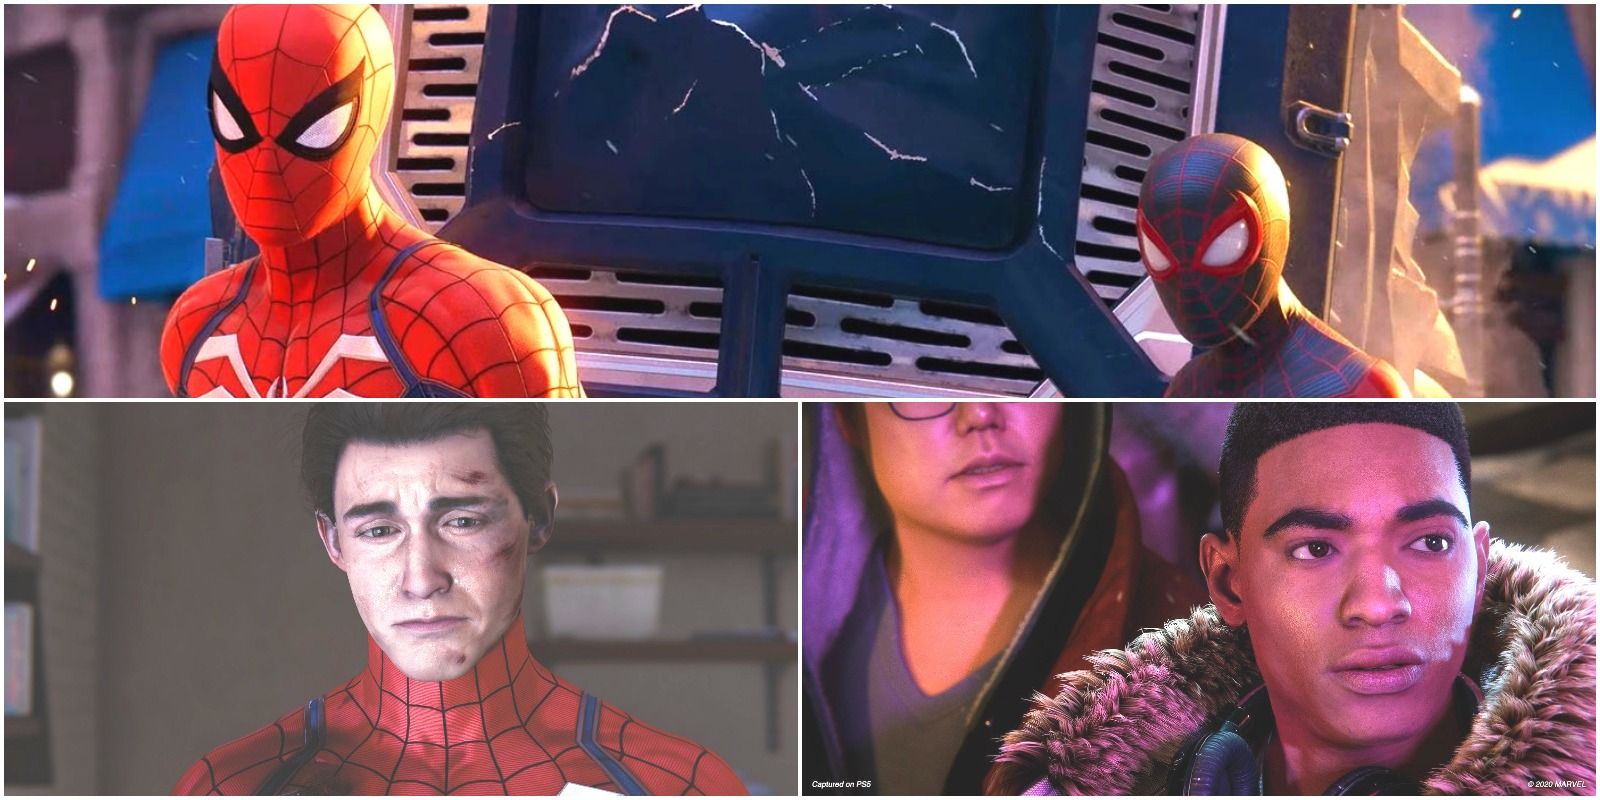 Peter teaching Miles how to be Spider-Man from the video game